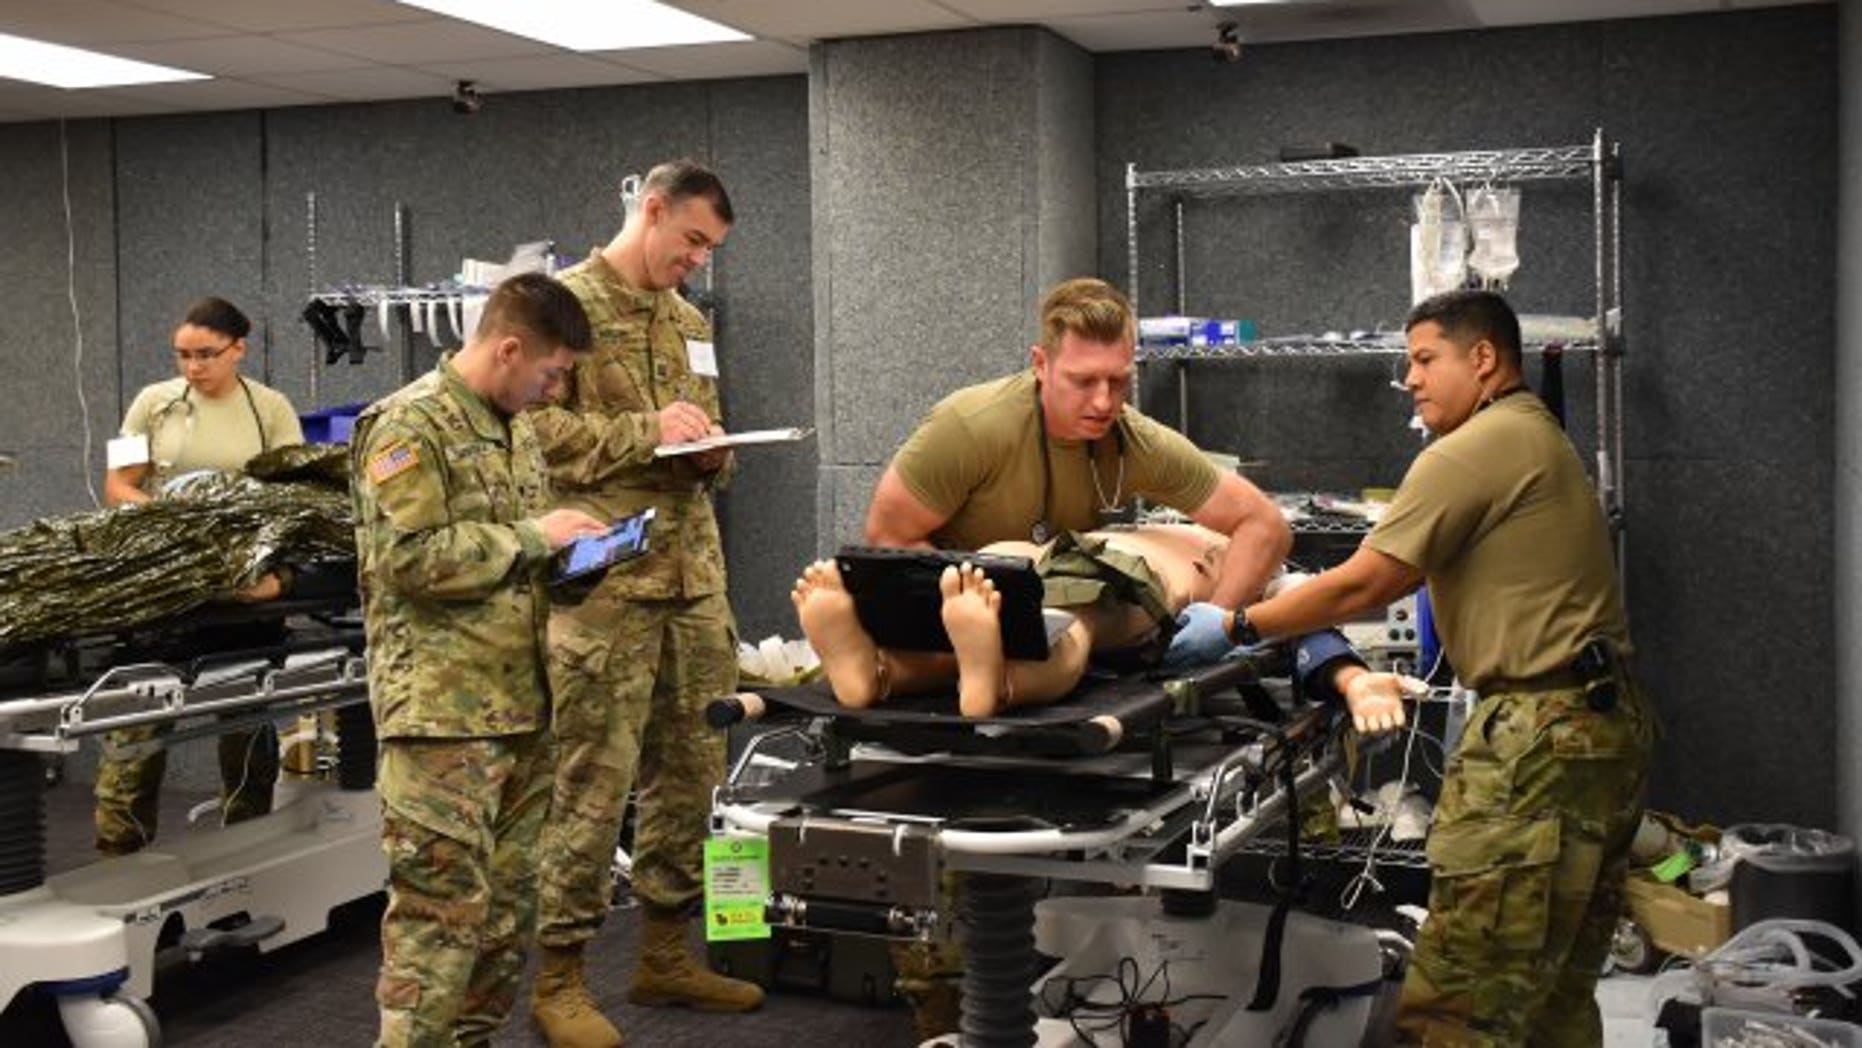 Army tests new communication device that could save wounded soldiers’ lives